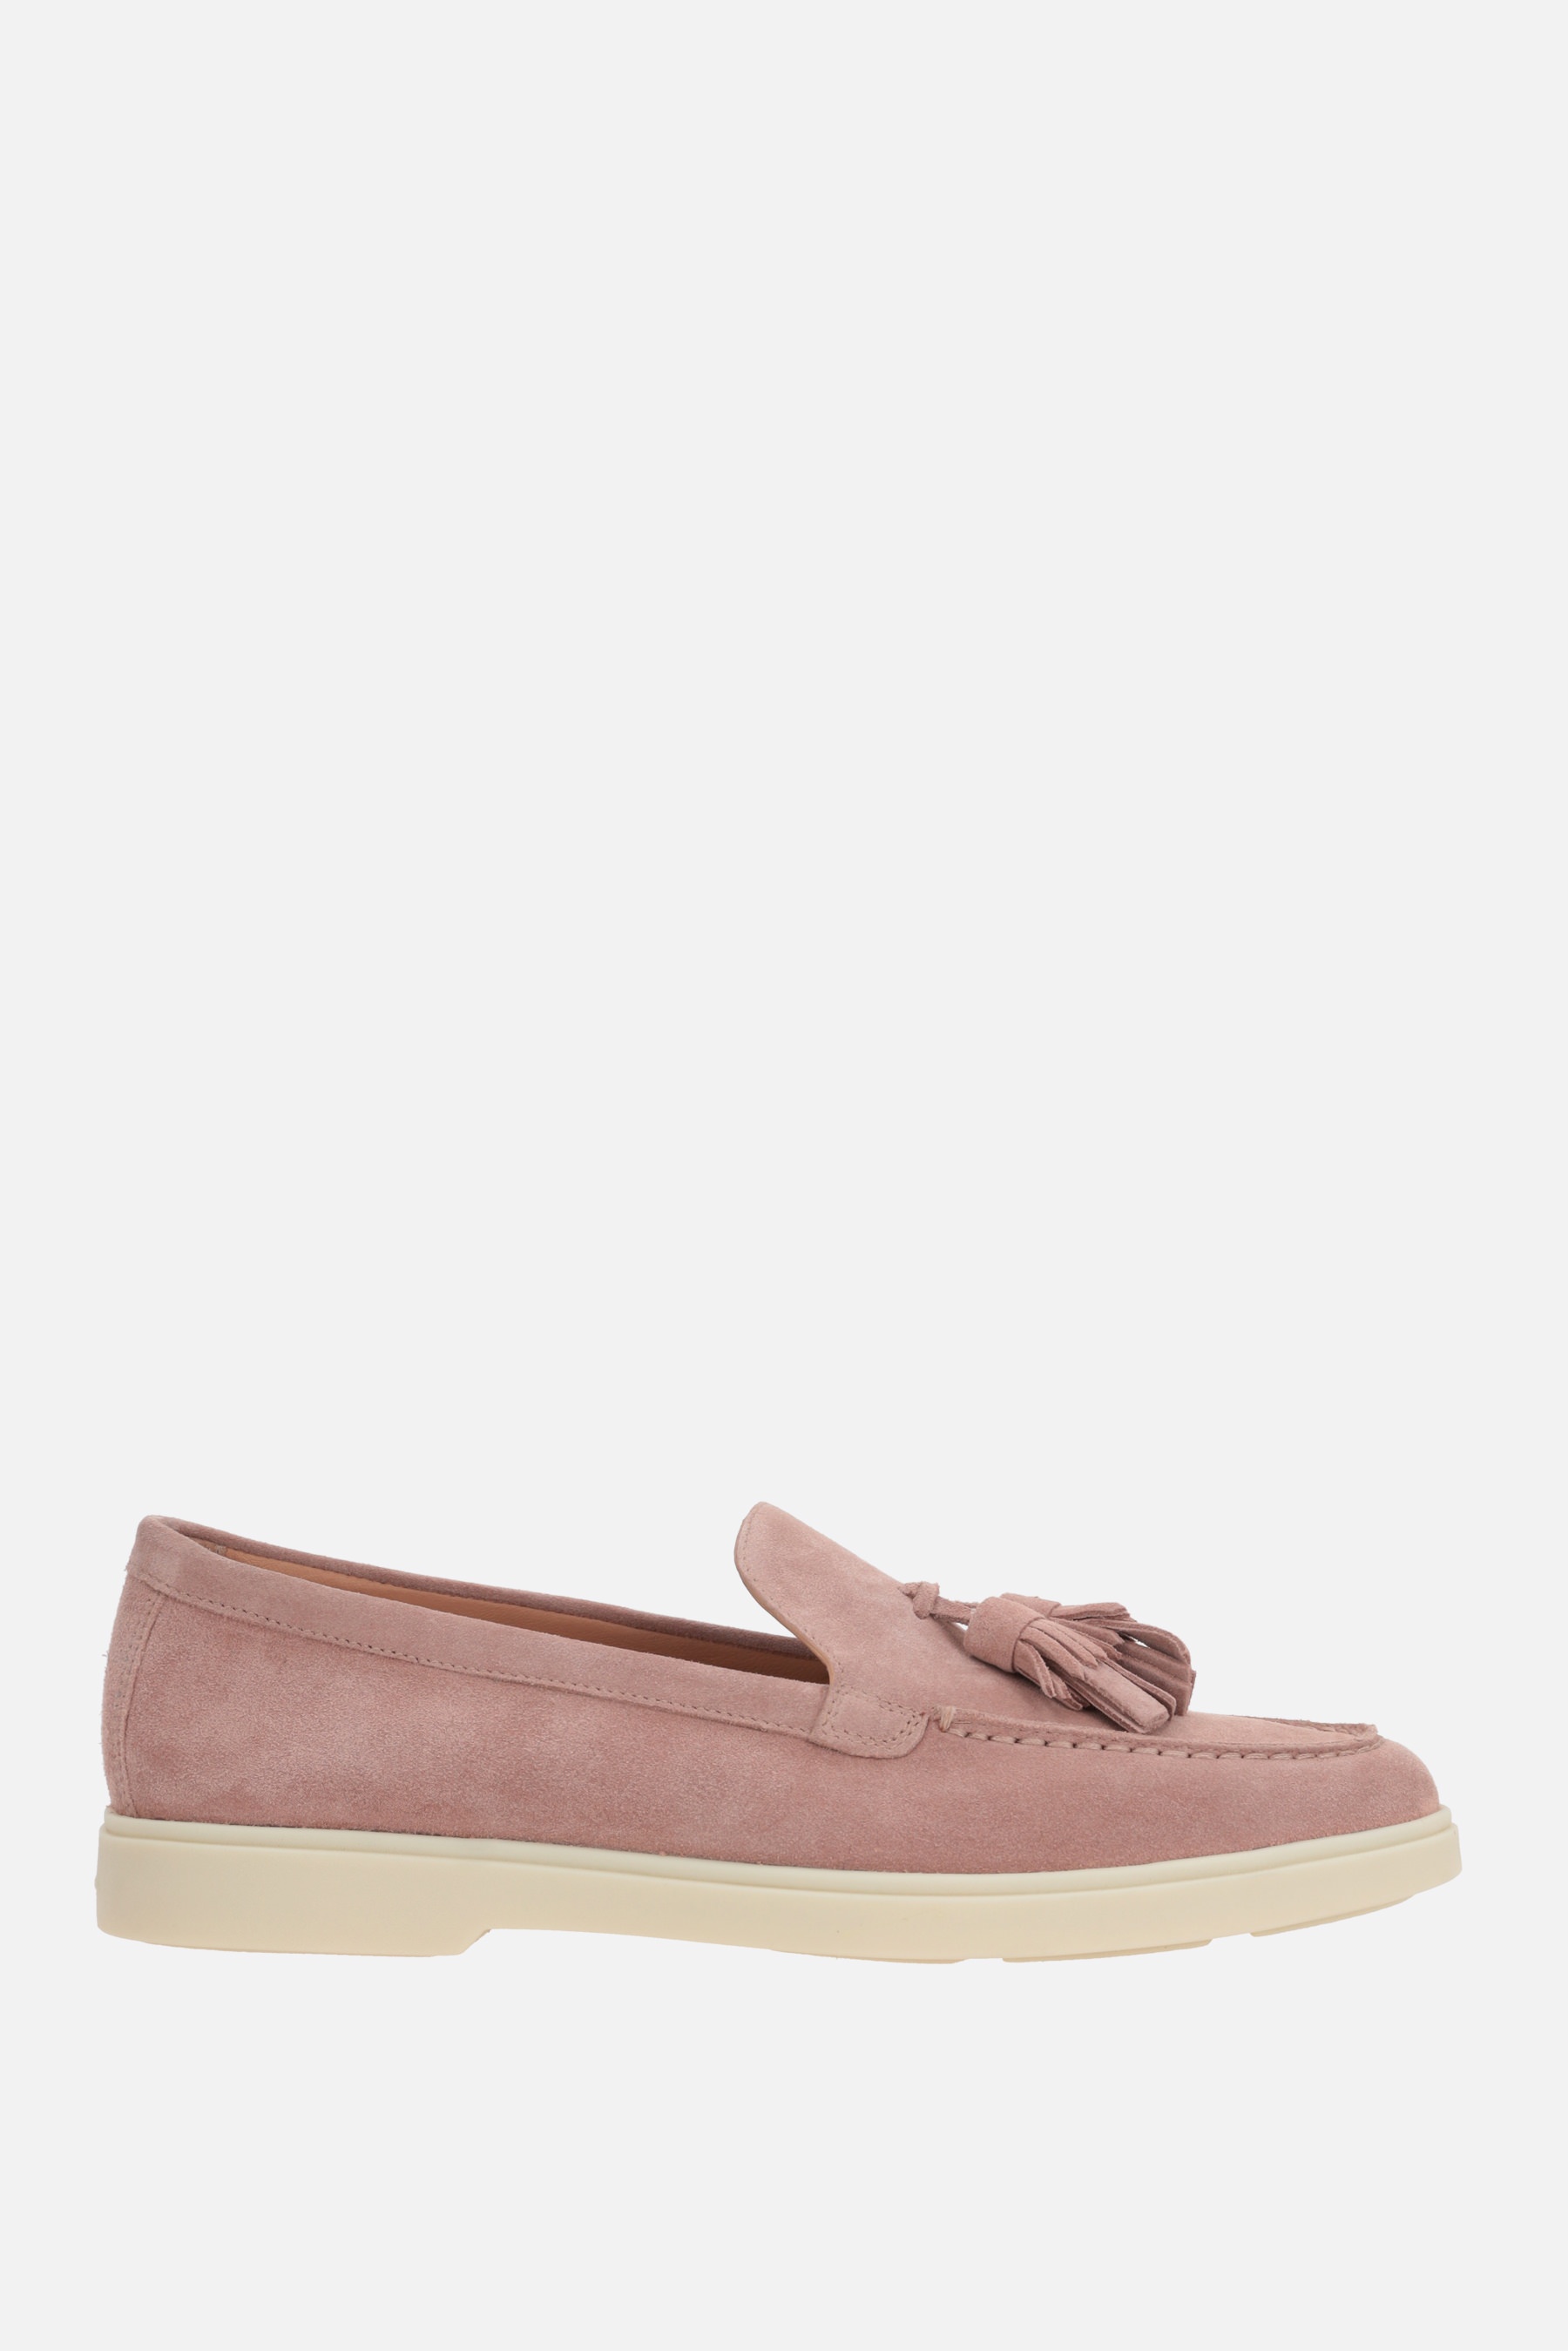 SUEDE LOAFERS WITH TASSELS - 1